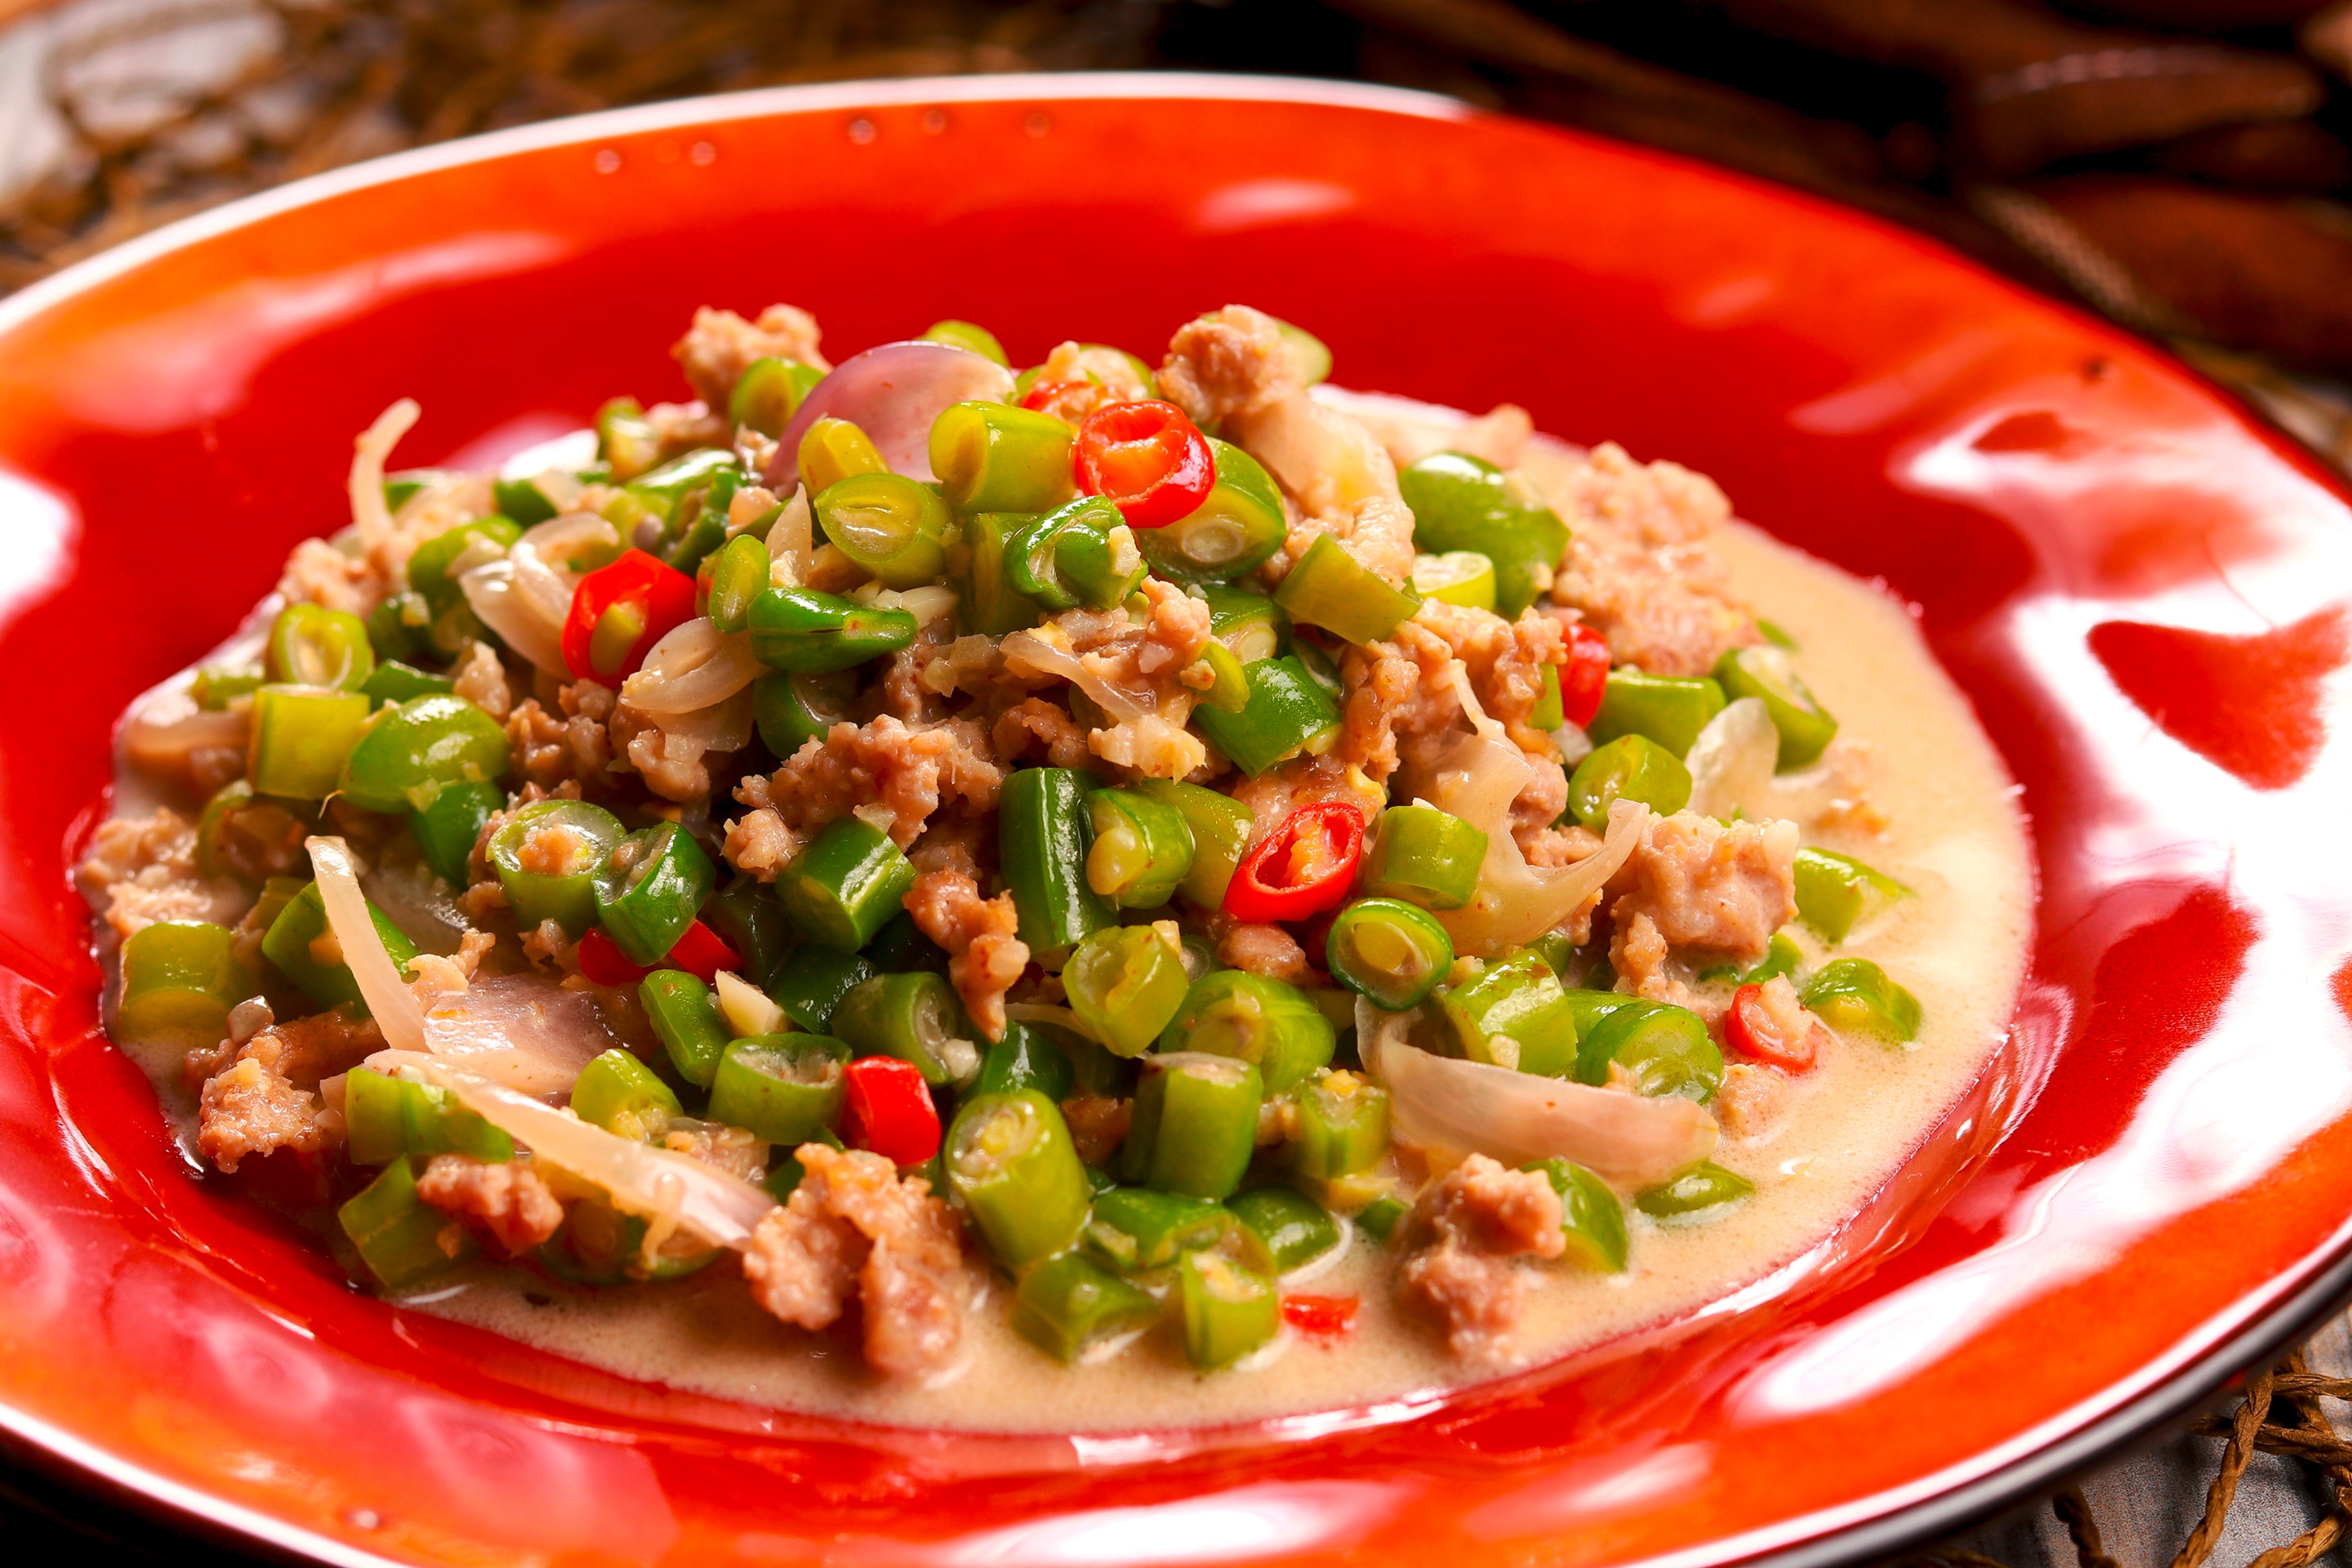 A plate of pork and beans with spicy coconut sauce